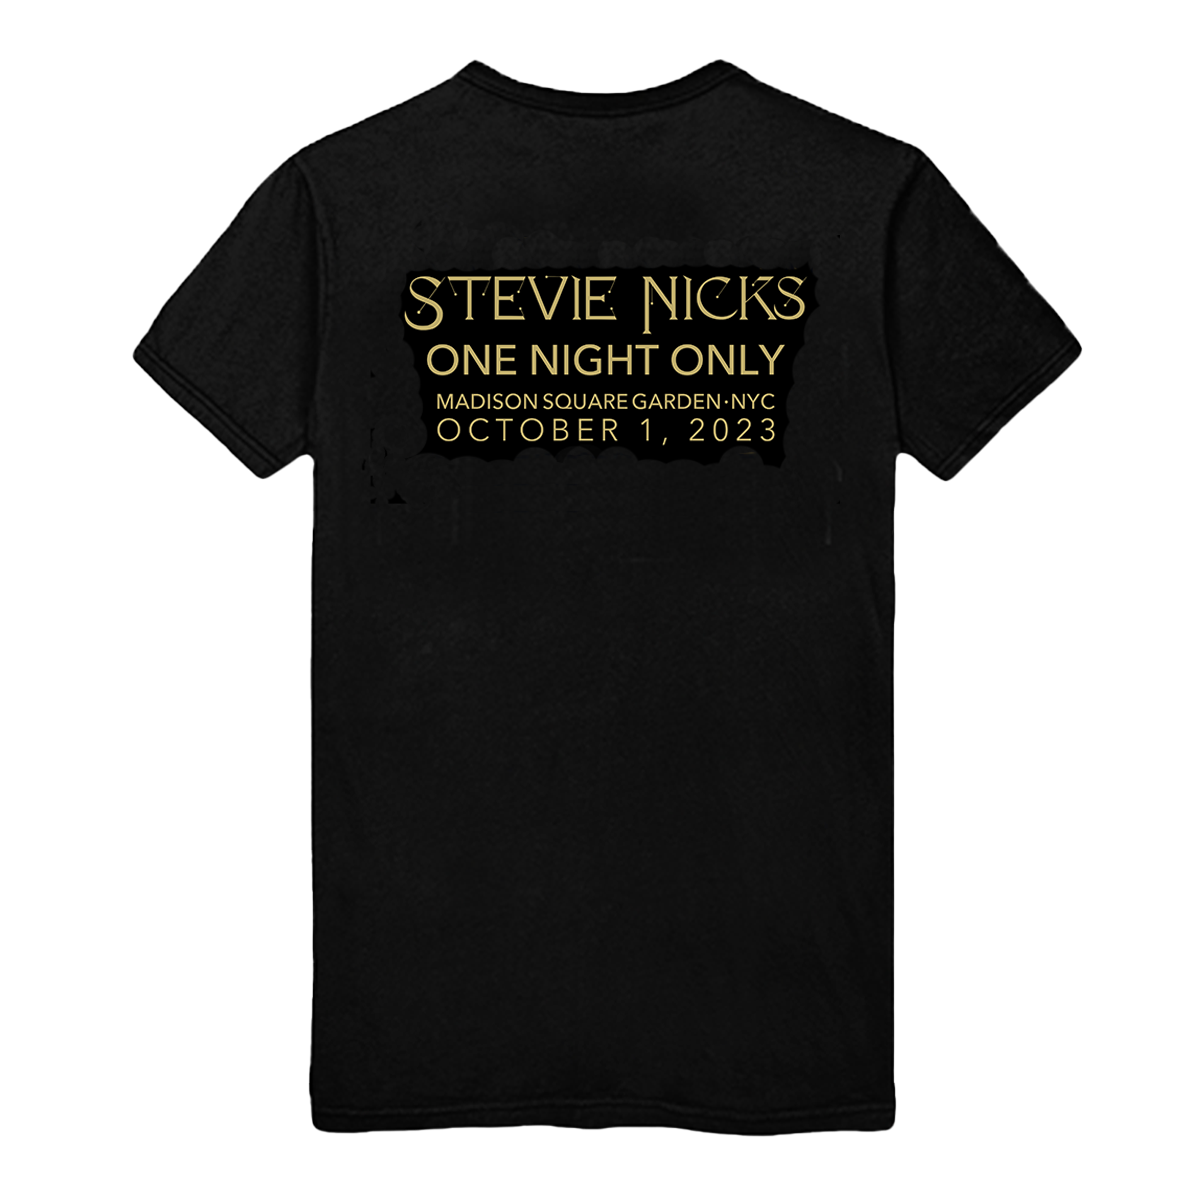 Stevie Nicks One Night Only MSG Event Tee